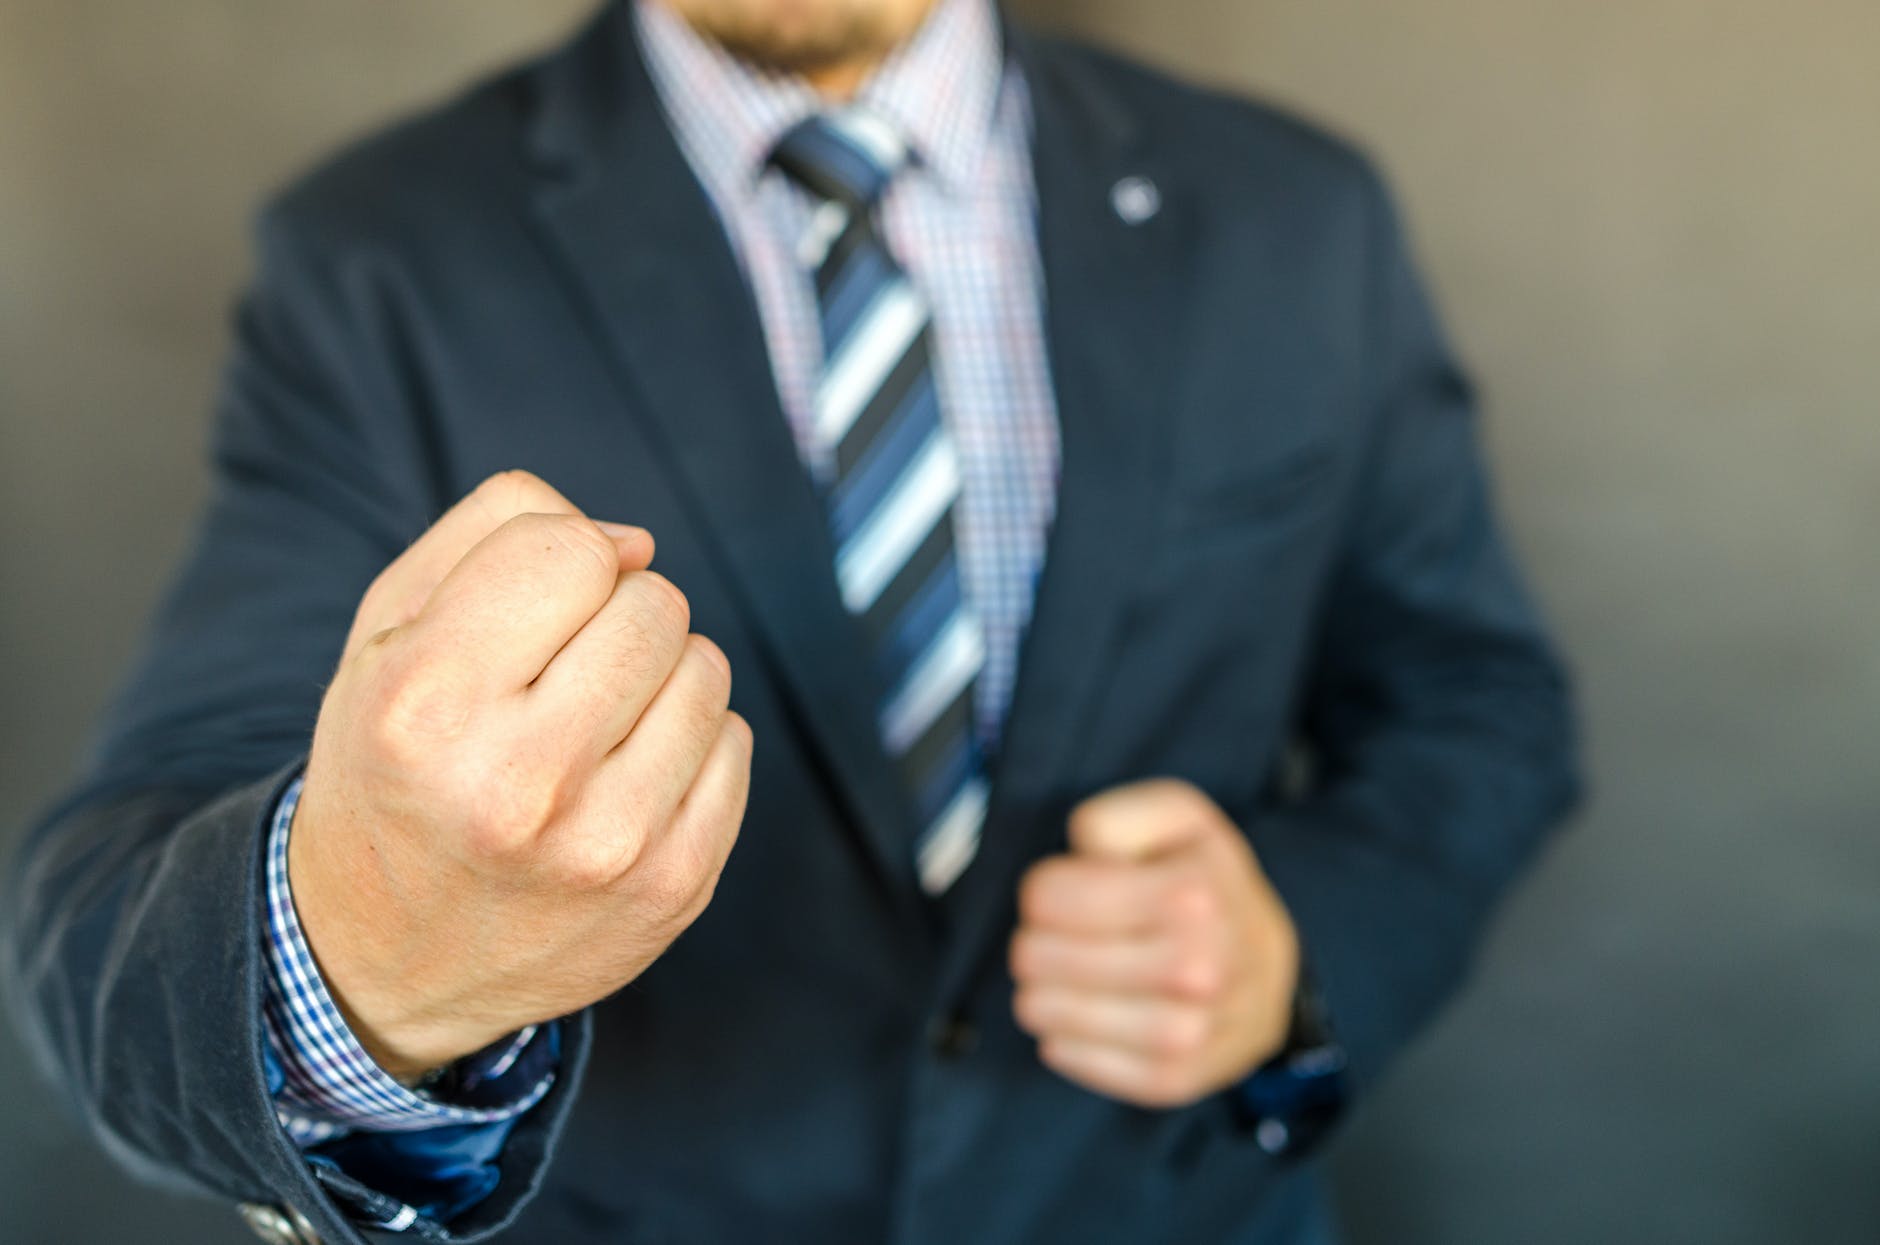 Workplace Bullying in Disguise: 6 subtle Forms of Aggression